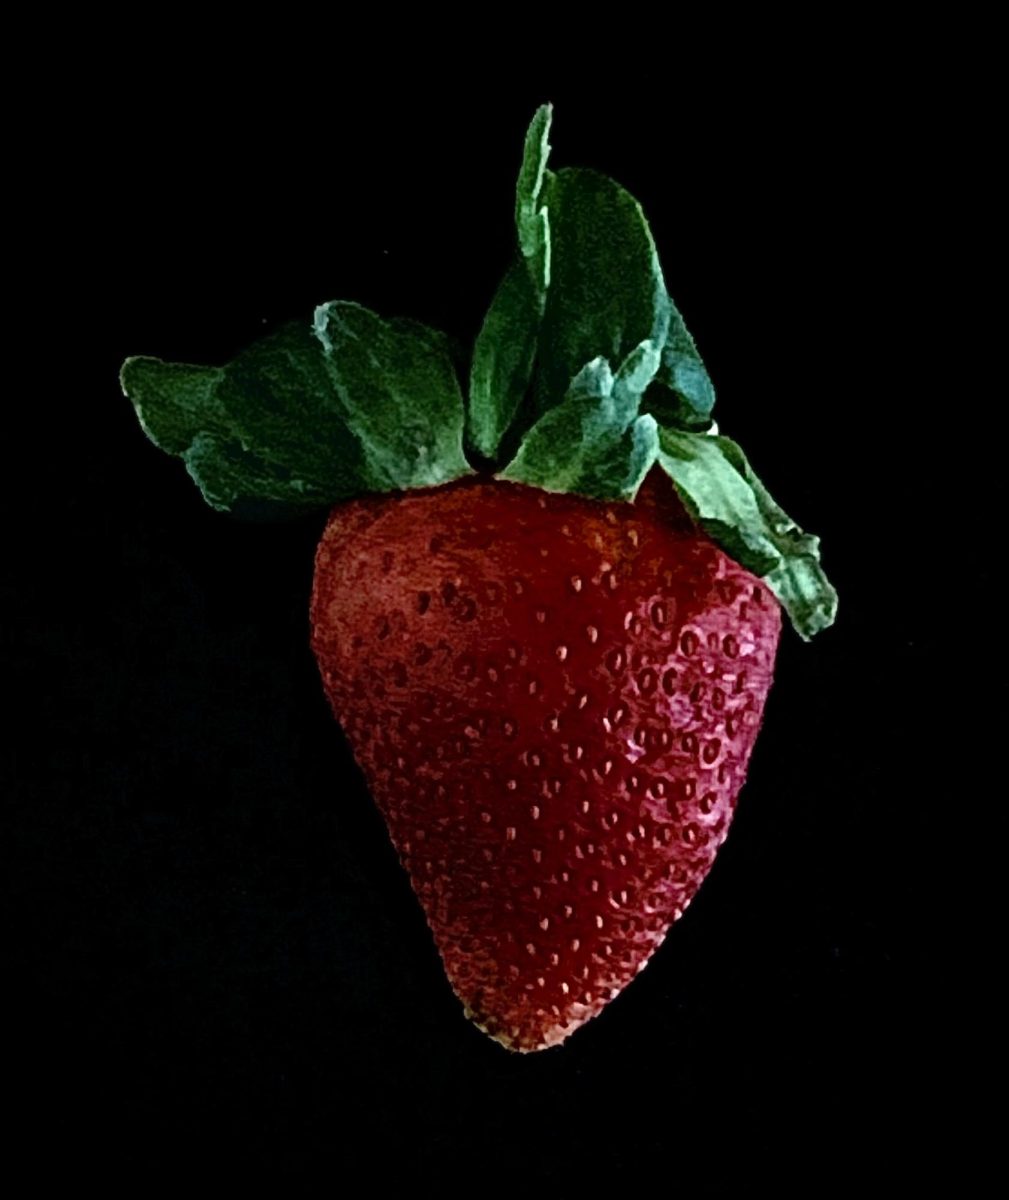 The+strawberry+bushes+never+failed+to+produce+beautiful+fruit.